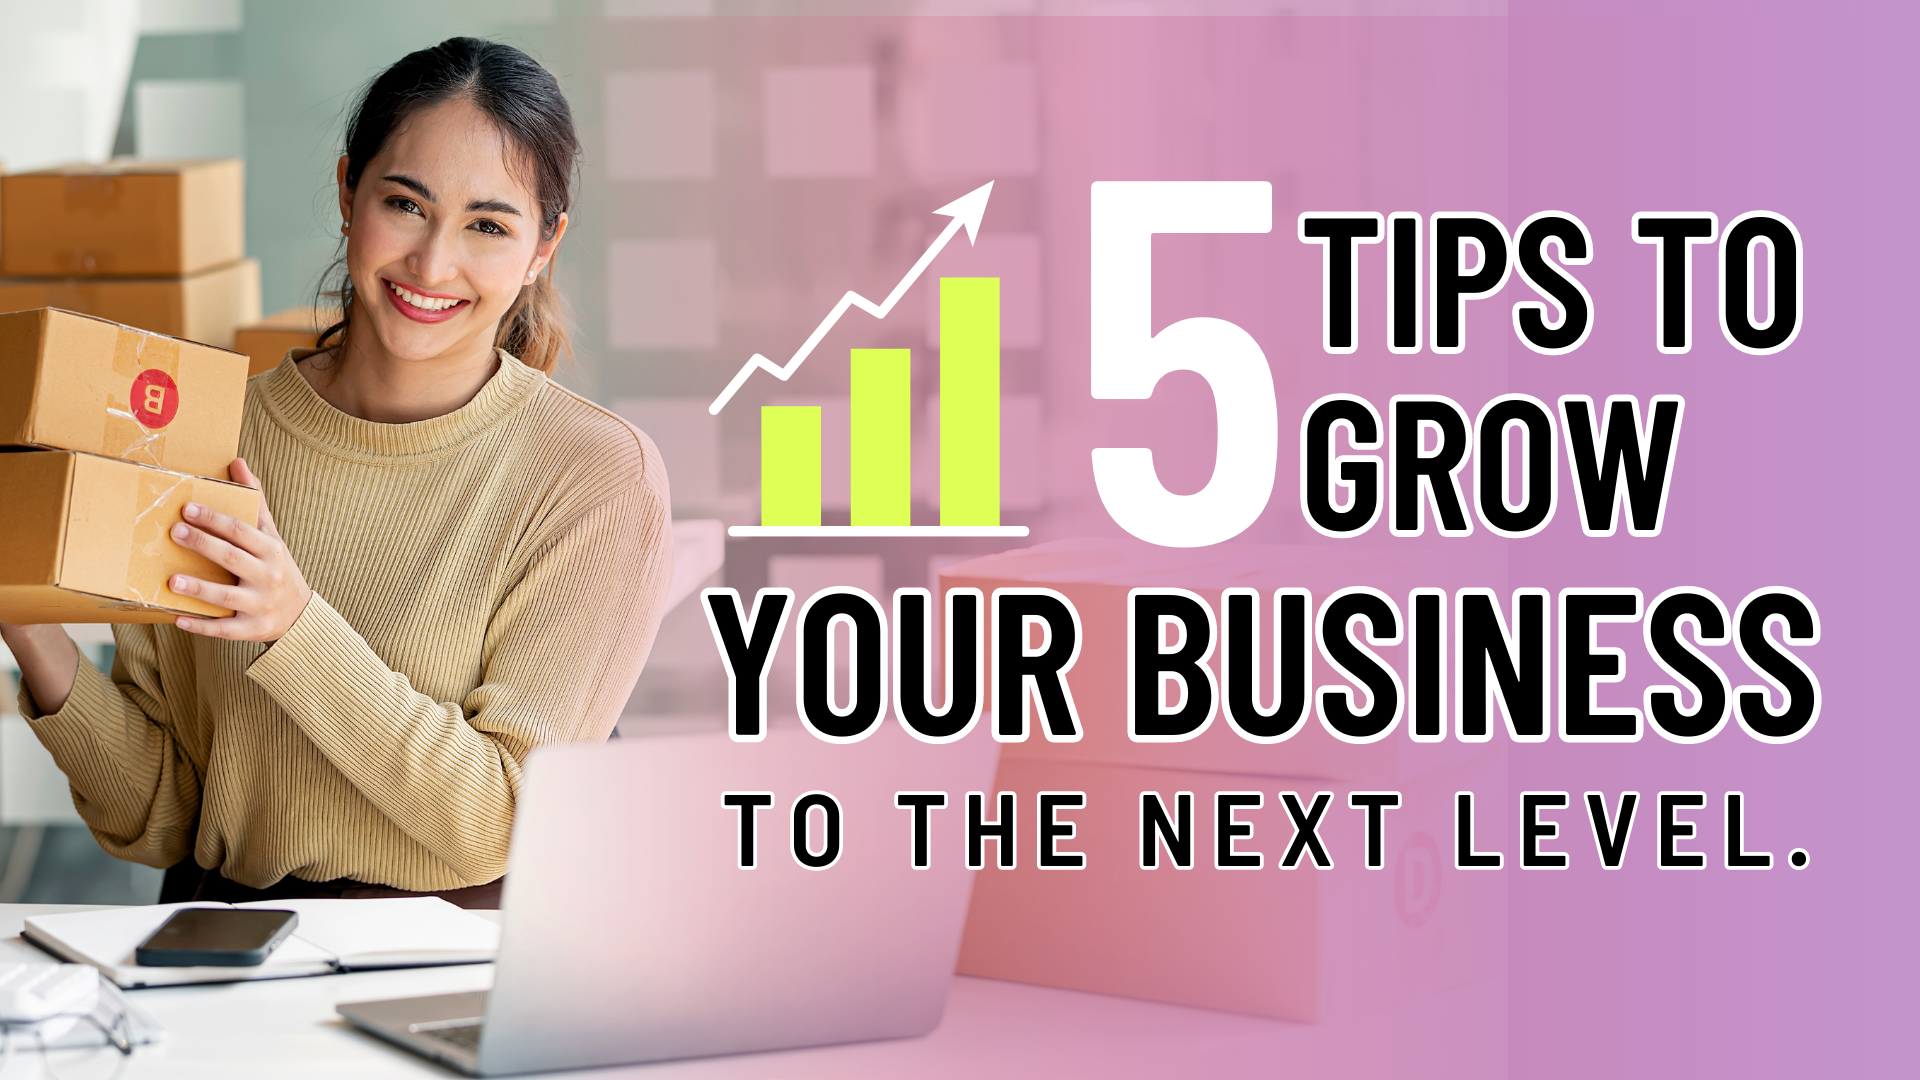 5 tips to grow your business to the next level.